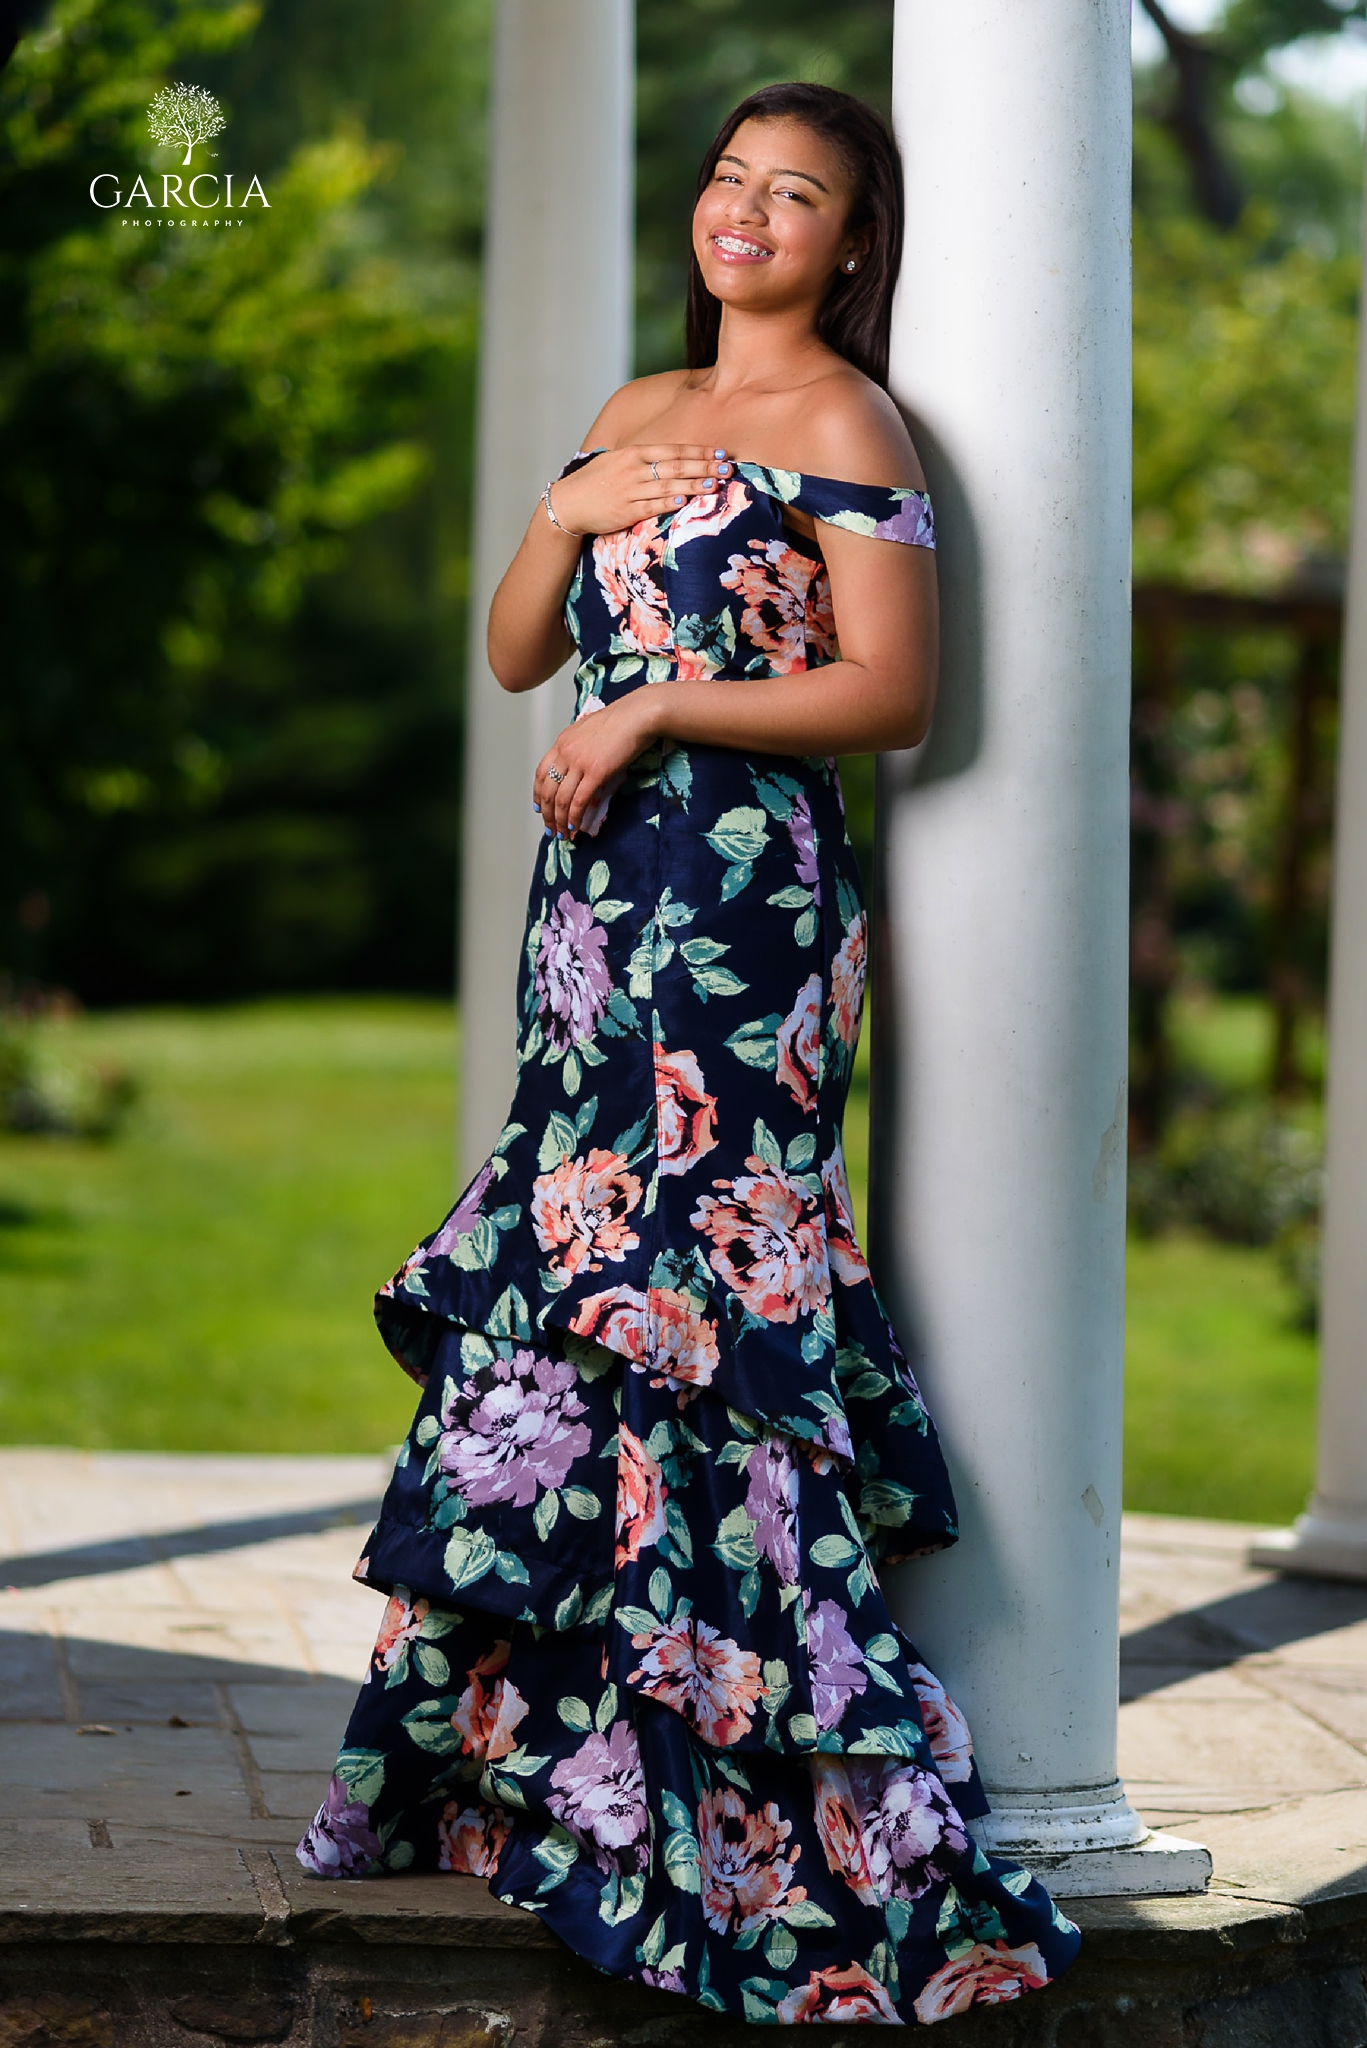 Emily-Quince-Session-Garcia-Photography-9095.jpg